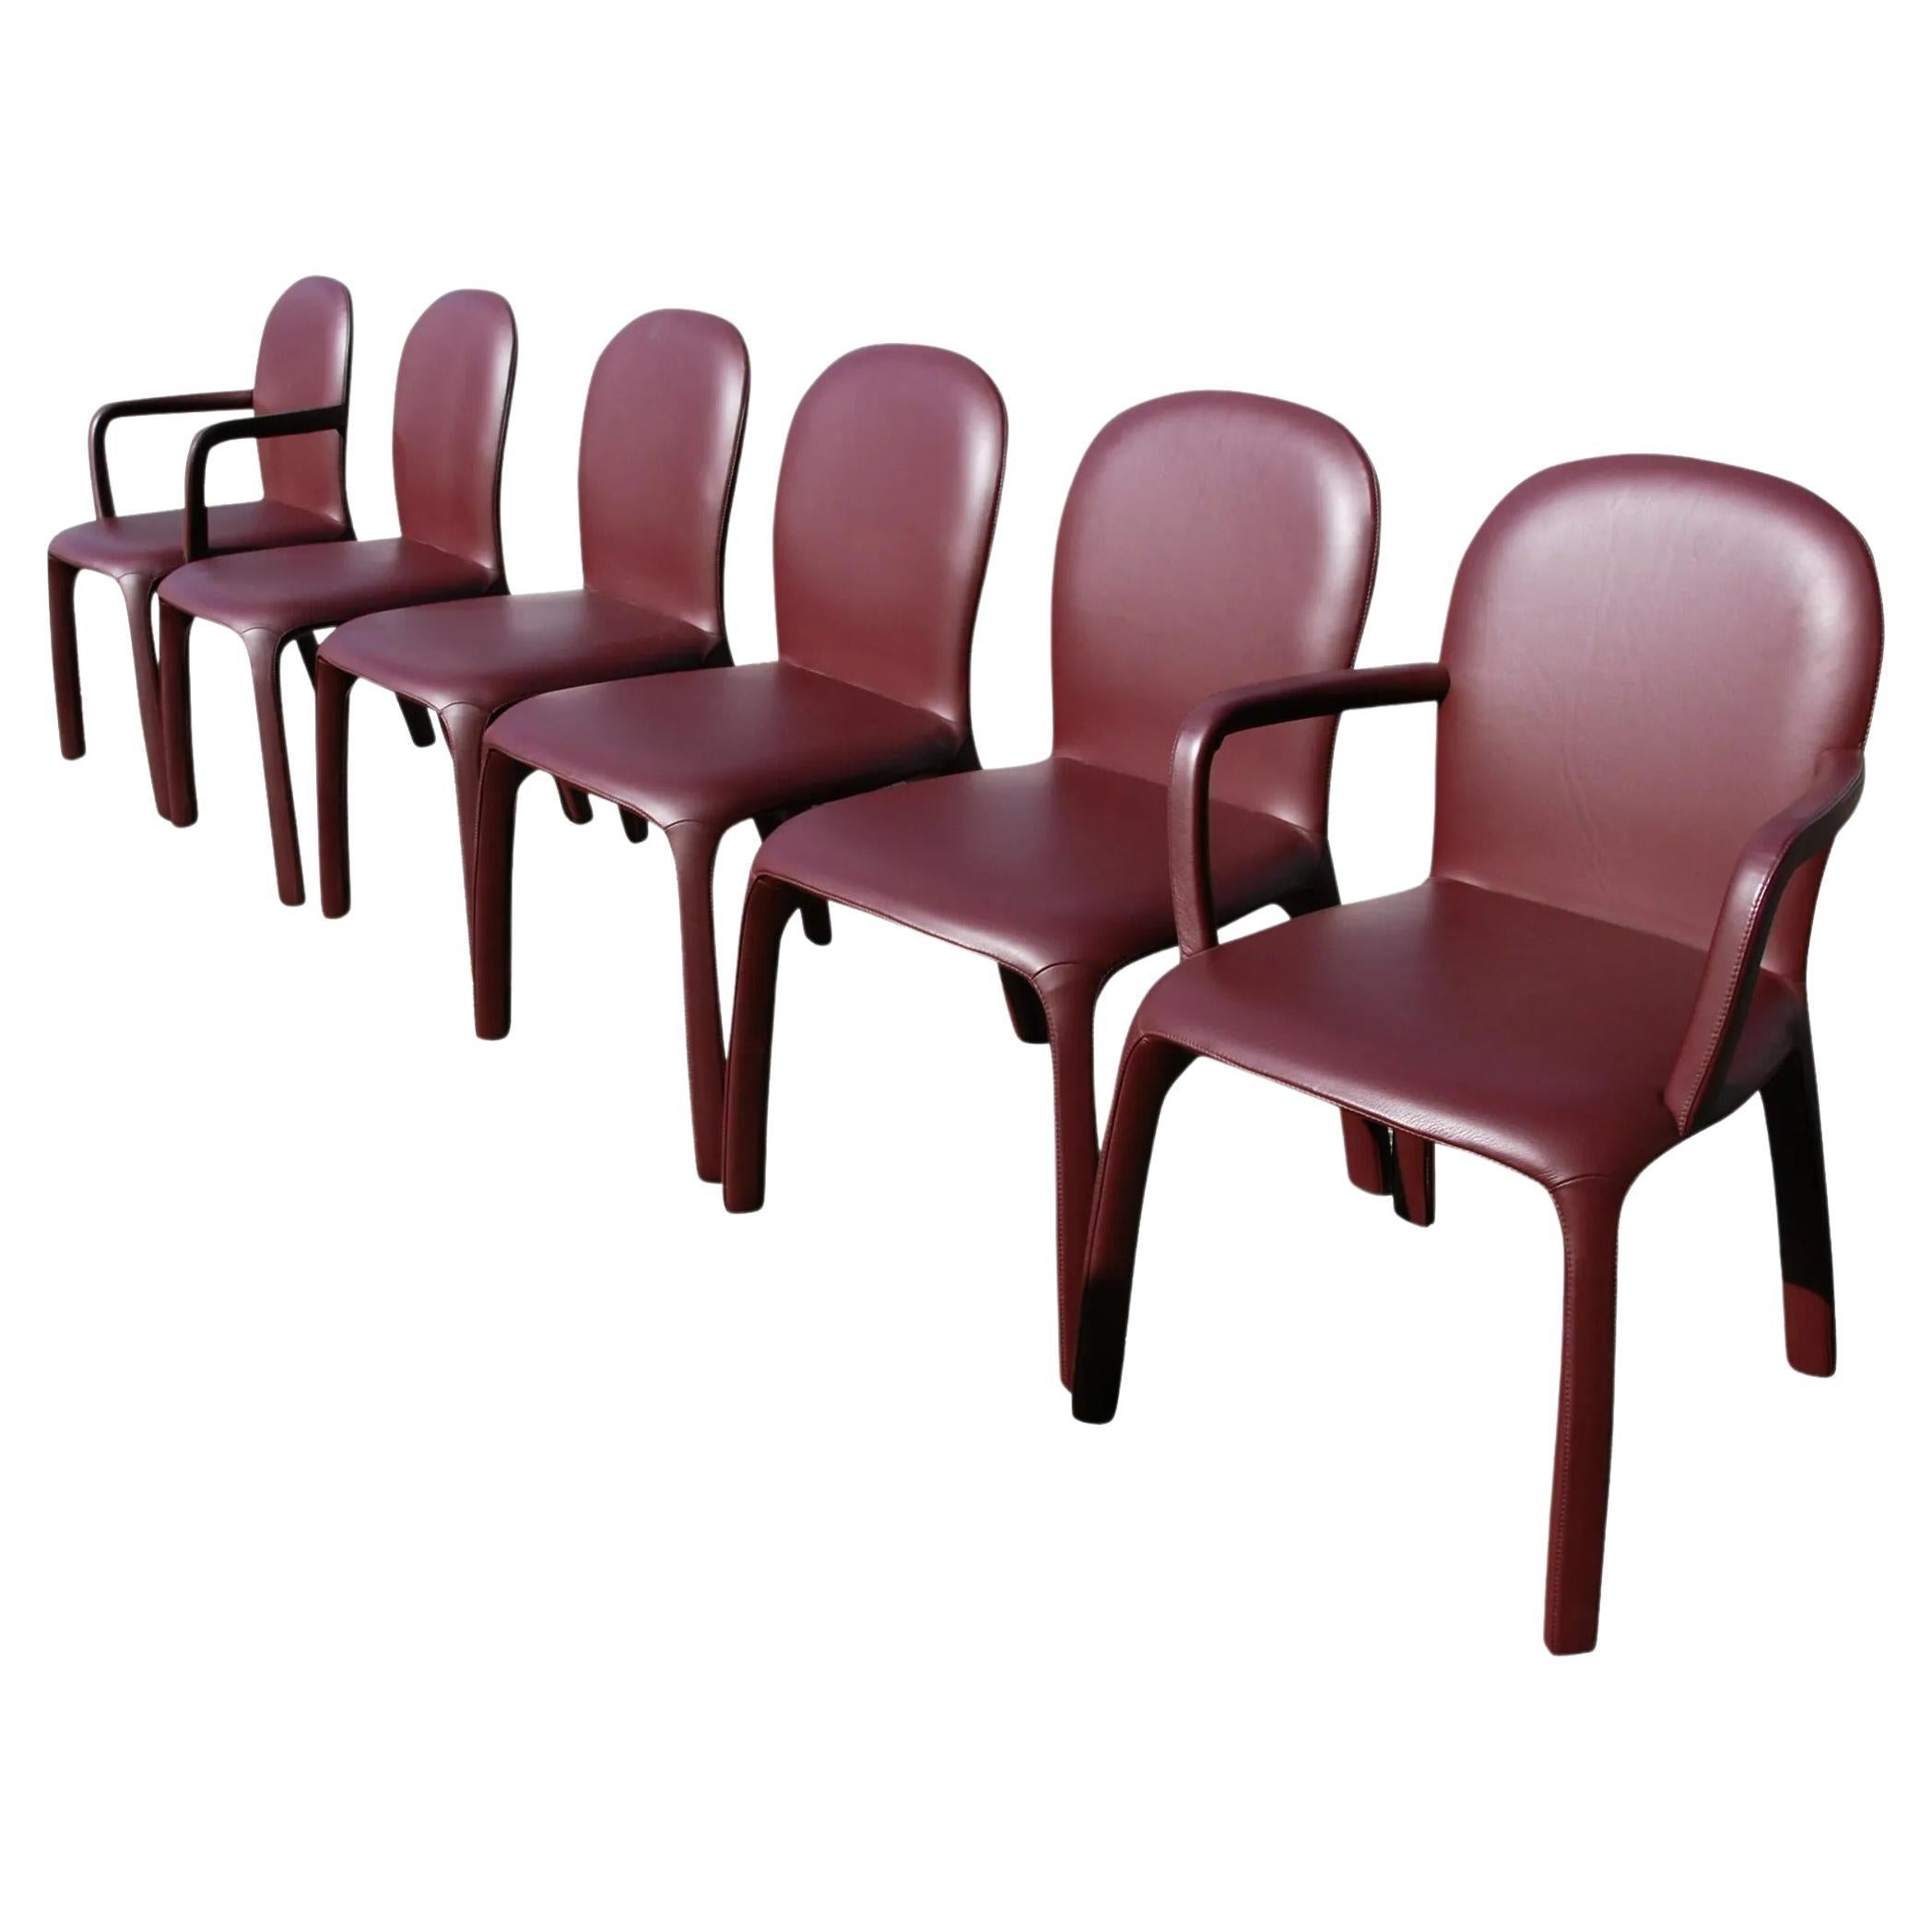 Set of 6 “Amelie” Dining Chairs by Claudio Bellini for Poltrona Frau For Sale